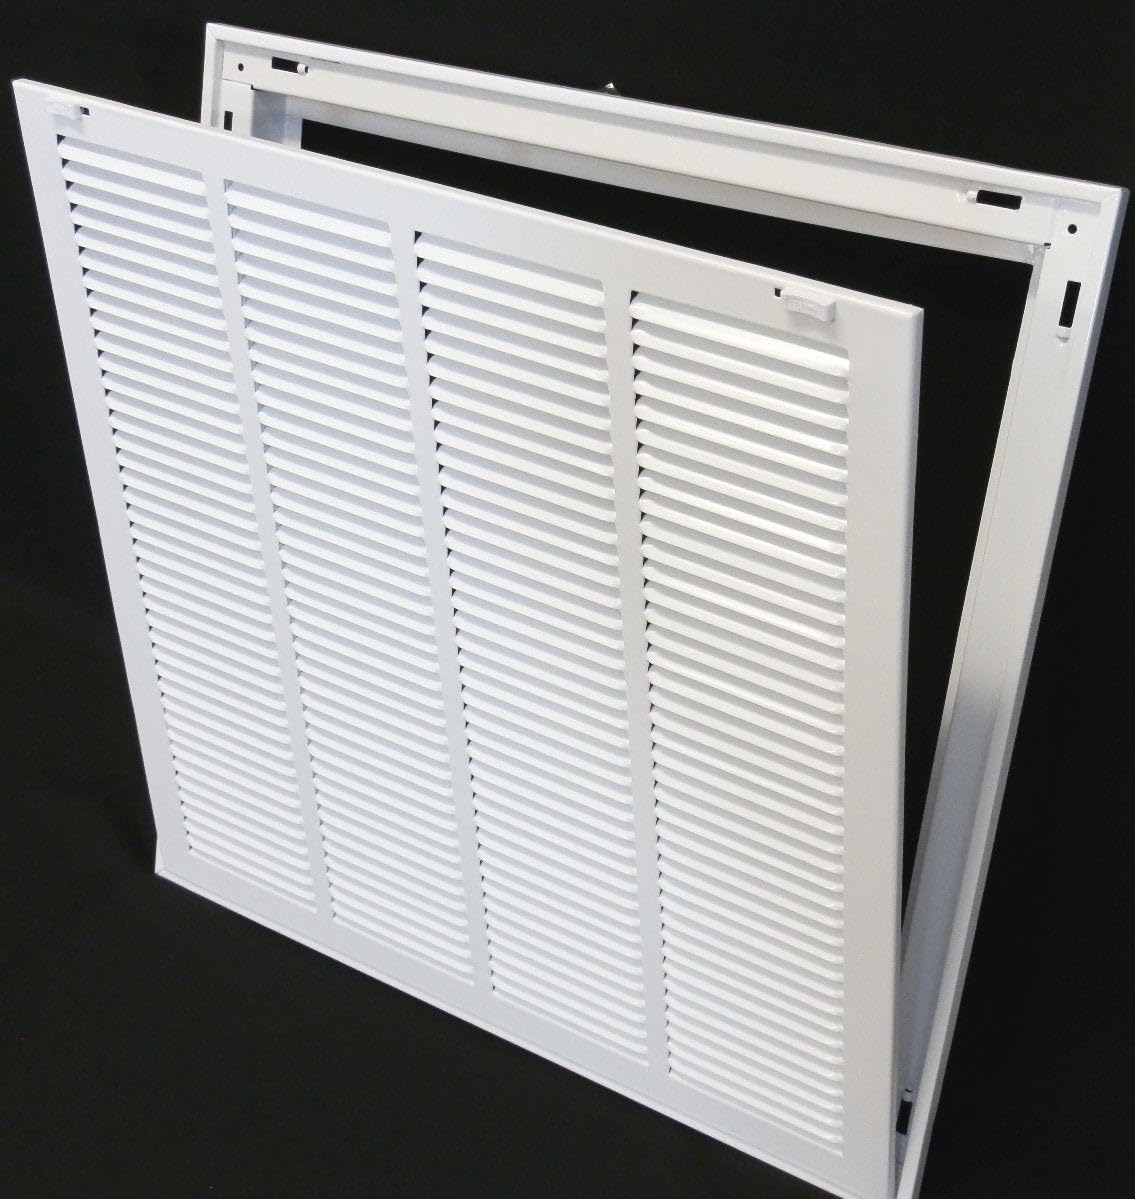 30&quot; X 24&quot; Steel Return Air Filter Grille for 1&quot; Filter - Removable Frame - [Outer Dimensions: 32 5/8&quot; X 26 5/8&quot;]